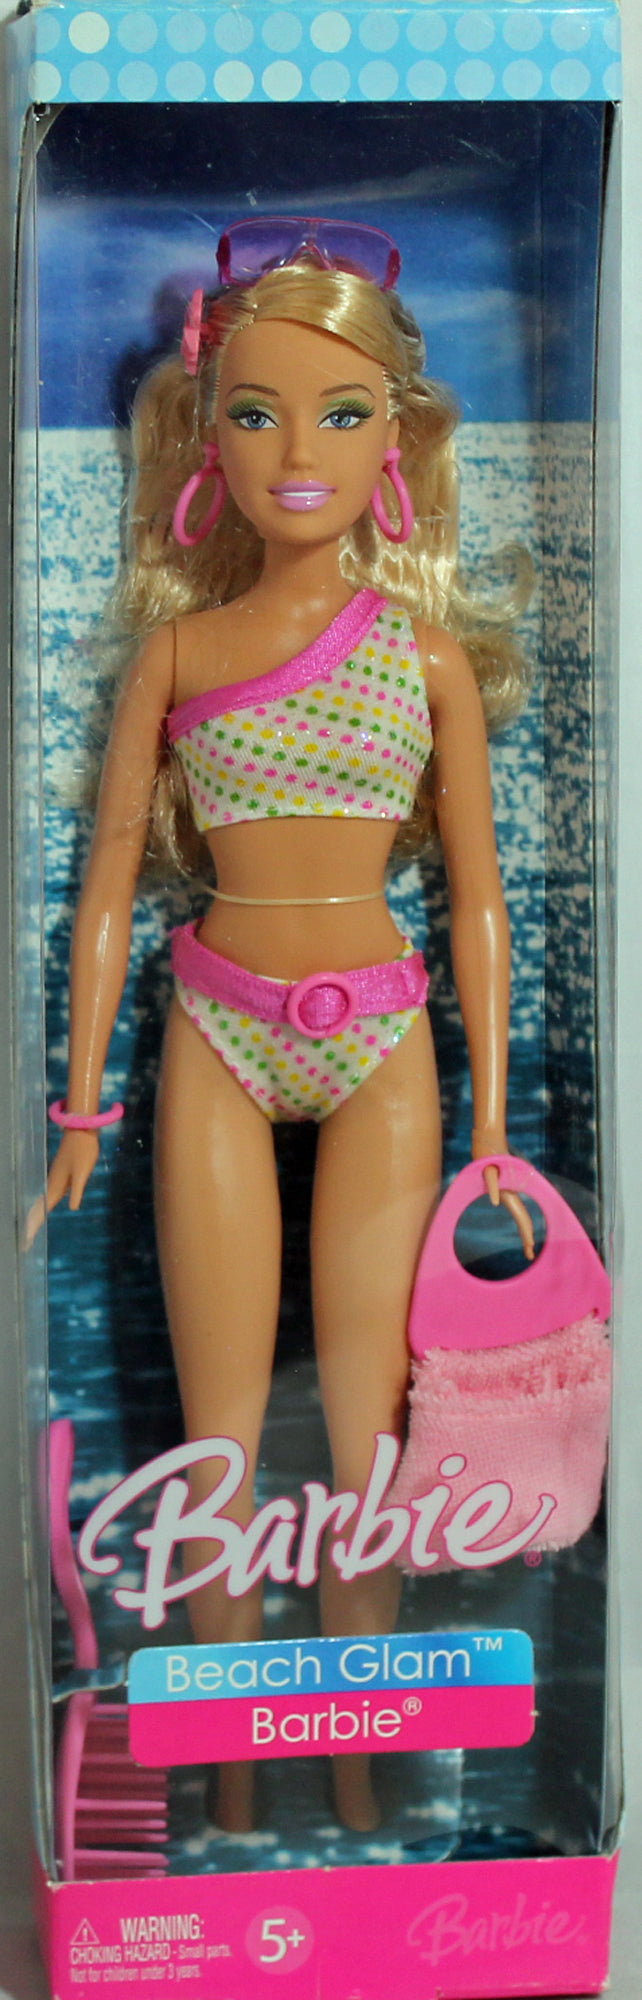 bypass farvning Stor 2006 Beach Glam Barbie – Sell4Value